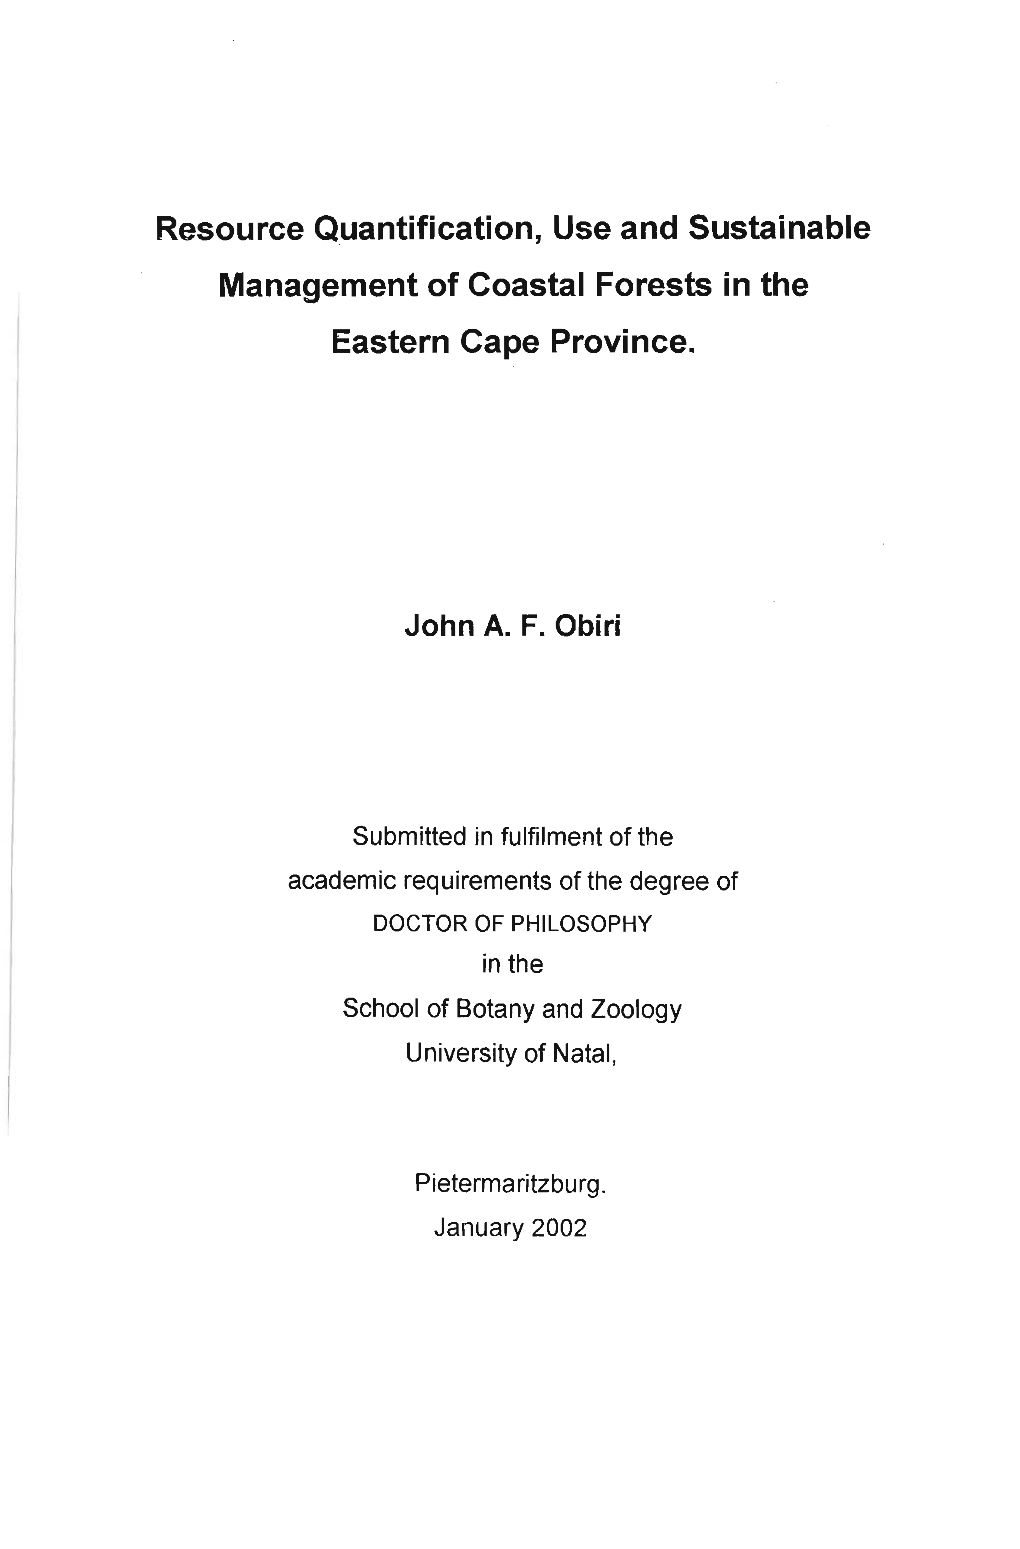 Resource Quantification, Use and Sustainable Management of Coastal Forests· in the Eastern Cape Province